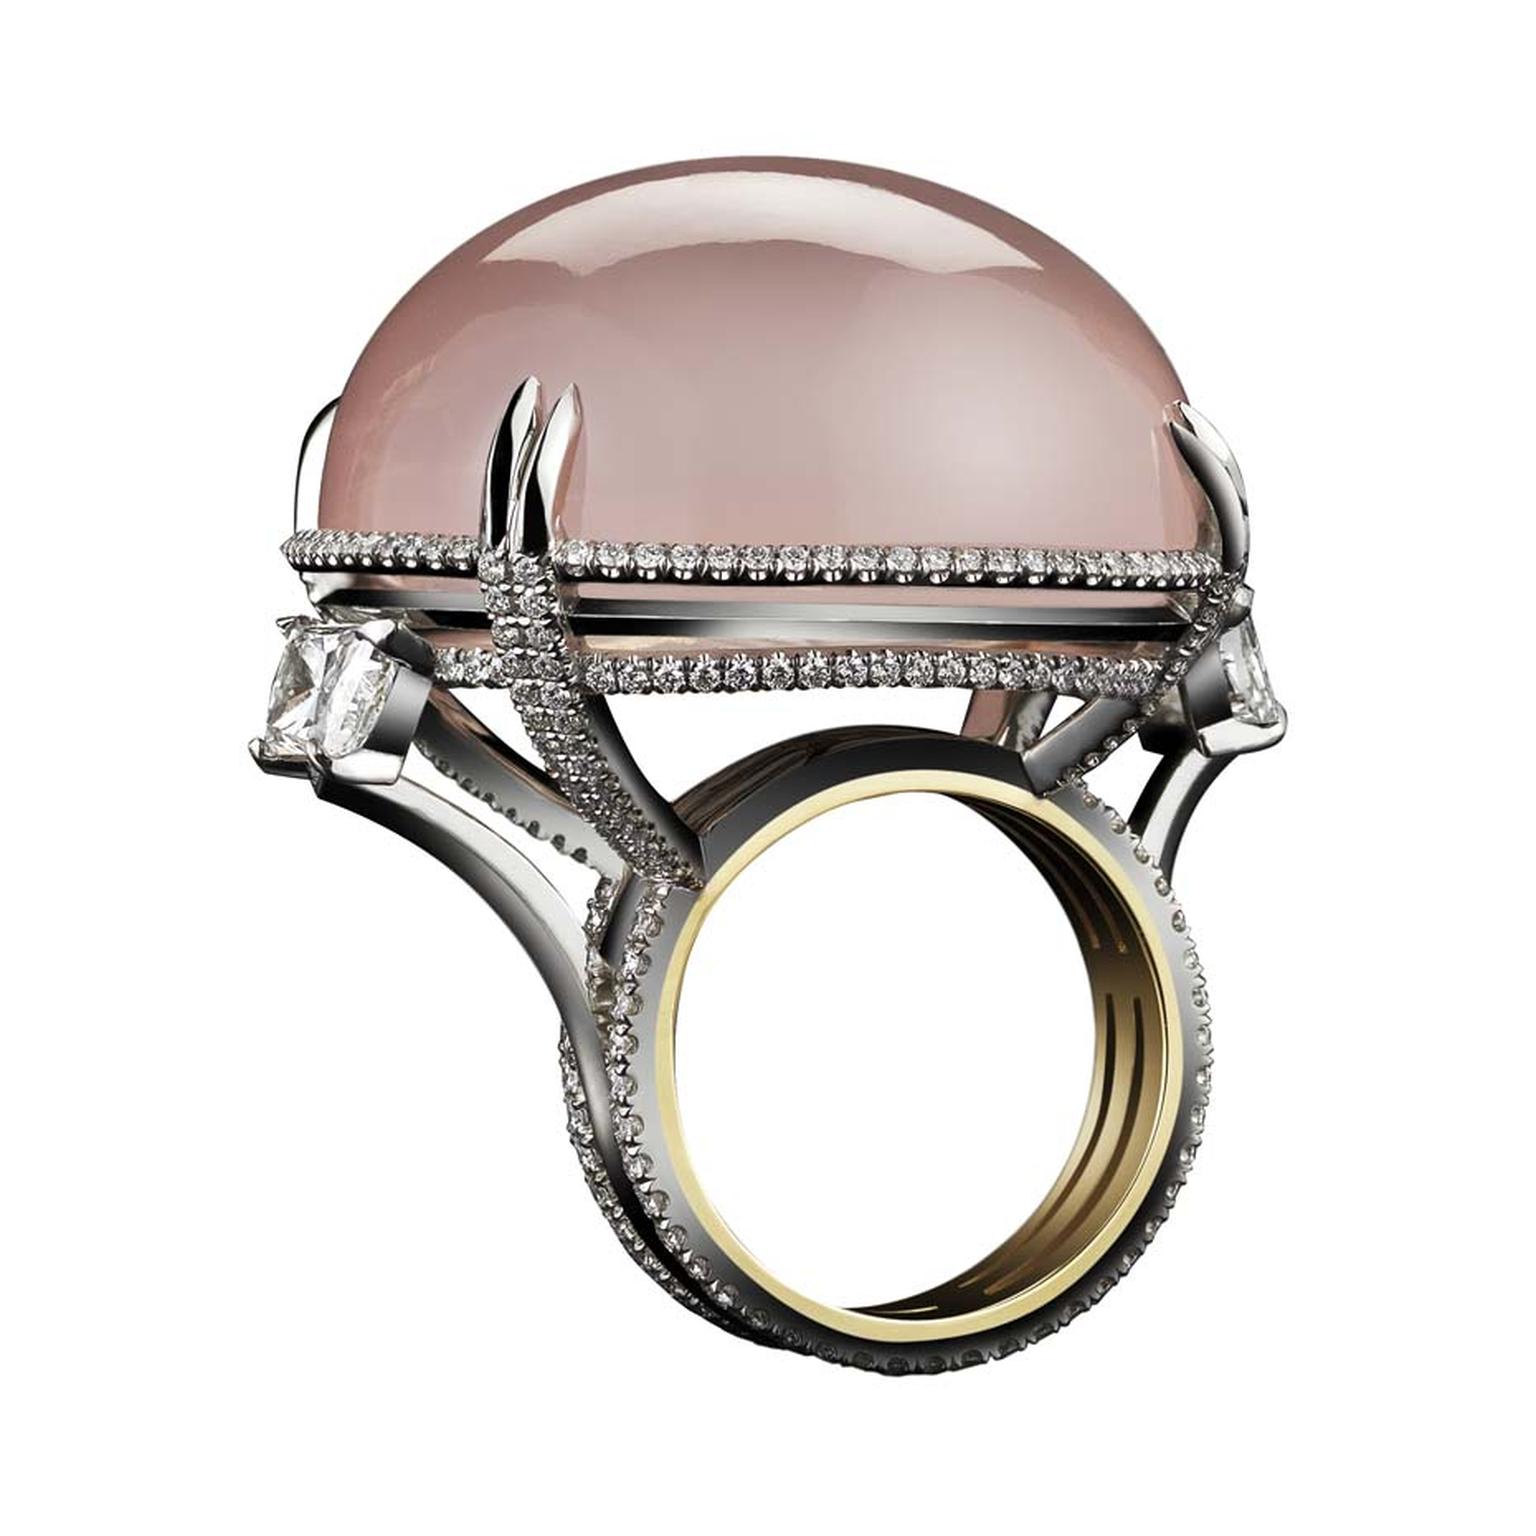 Alexandra Mor rose quartz cabochon orb ring is set slightly off-center while surrounded by pavé diamonds and two square-cut diamonds jutting out from the diamond band.